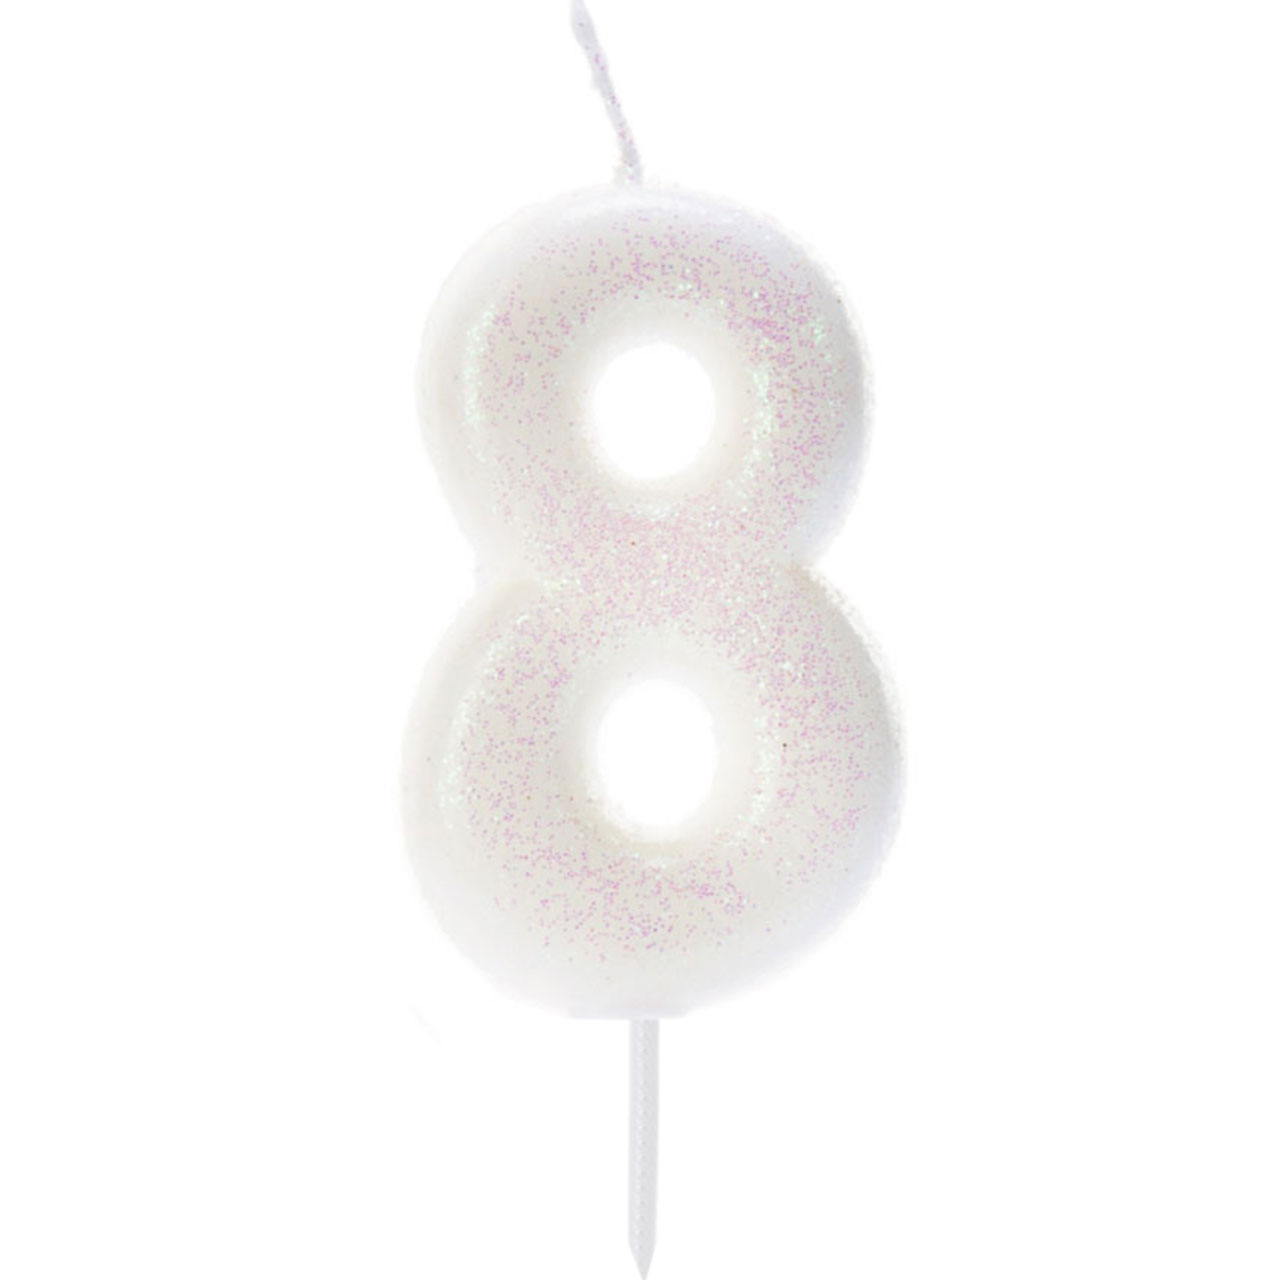 Iridescent Number "8" Candle